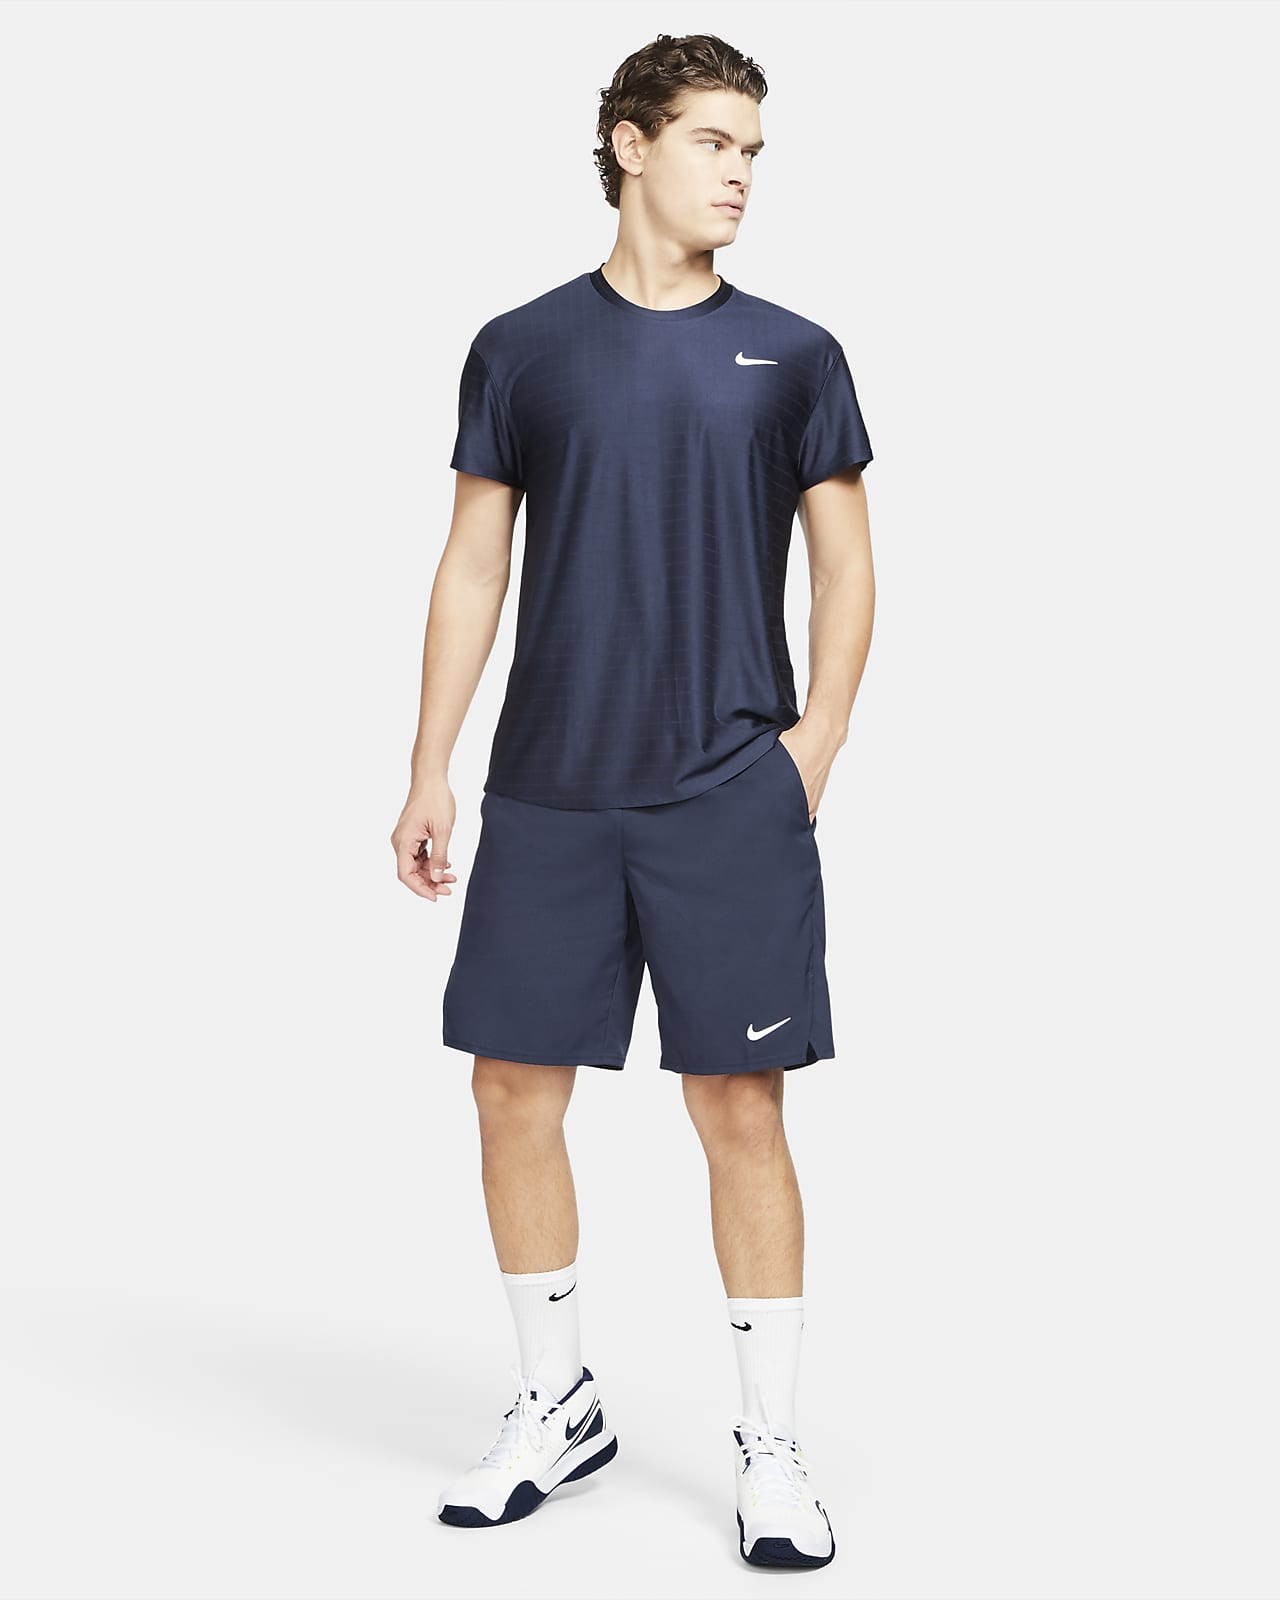 https://static.nike.com/a/images/t_PDP_1280_v1/f_auto,q_auto:eco/3aa7f626-b55a-4d7f-b52b-5a3ba53f760d/nikecourt-dri-fit-victory-23cm-tennis-shorts-rf85Ph.png